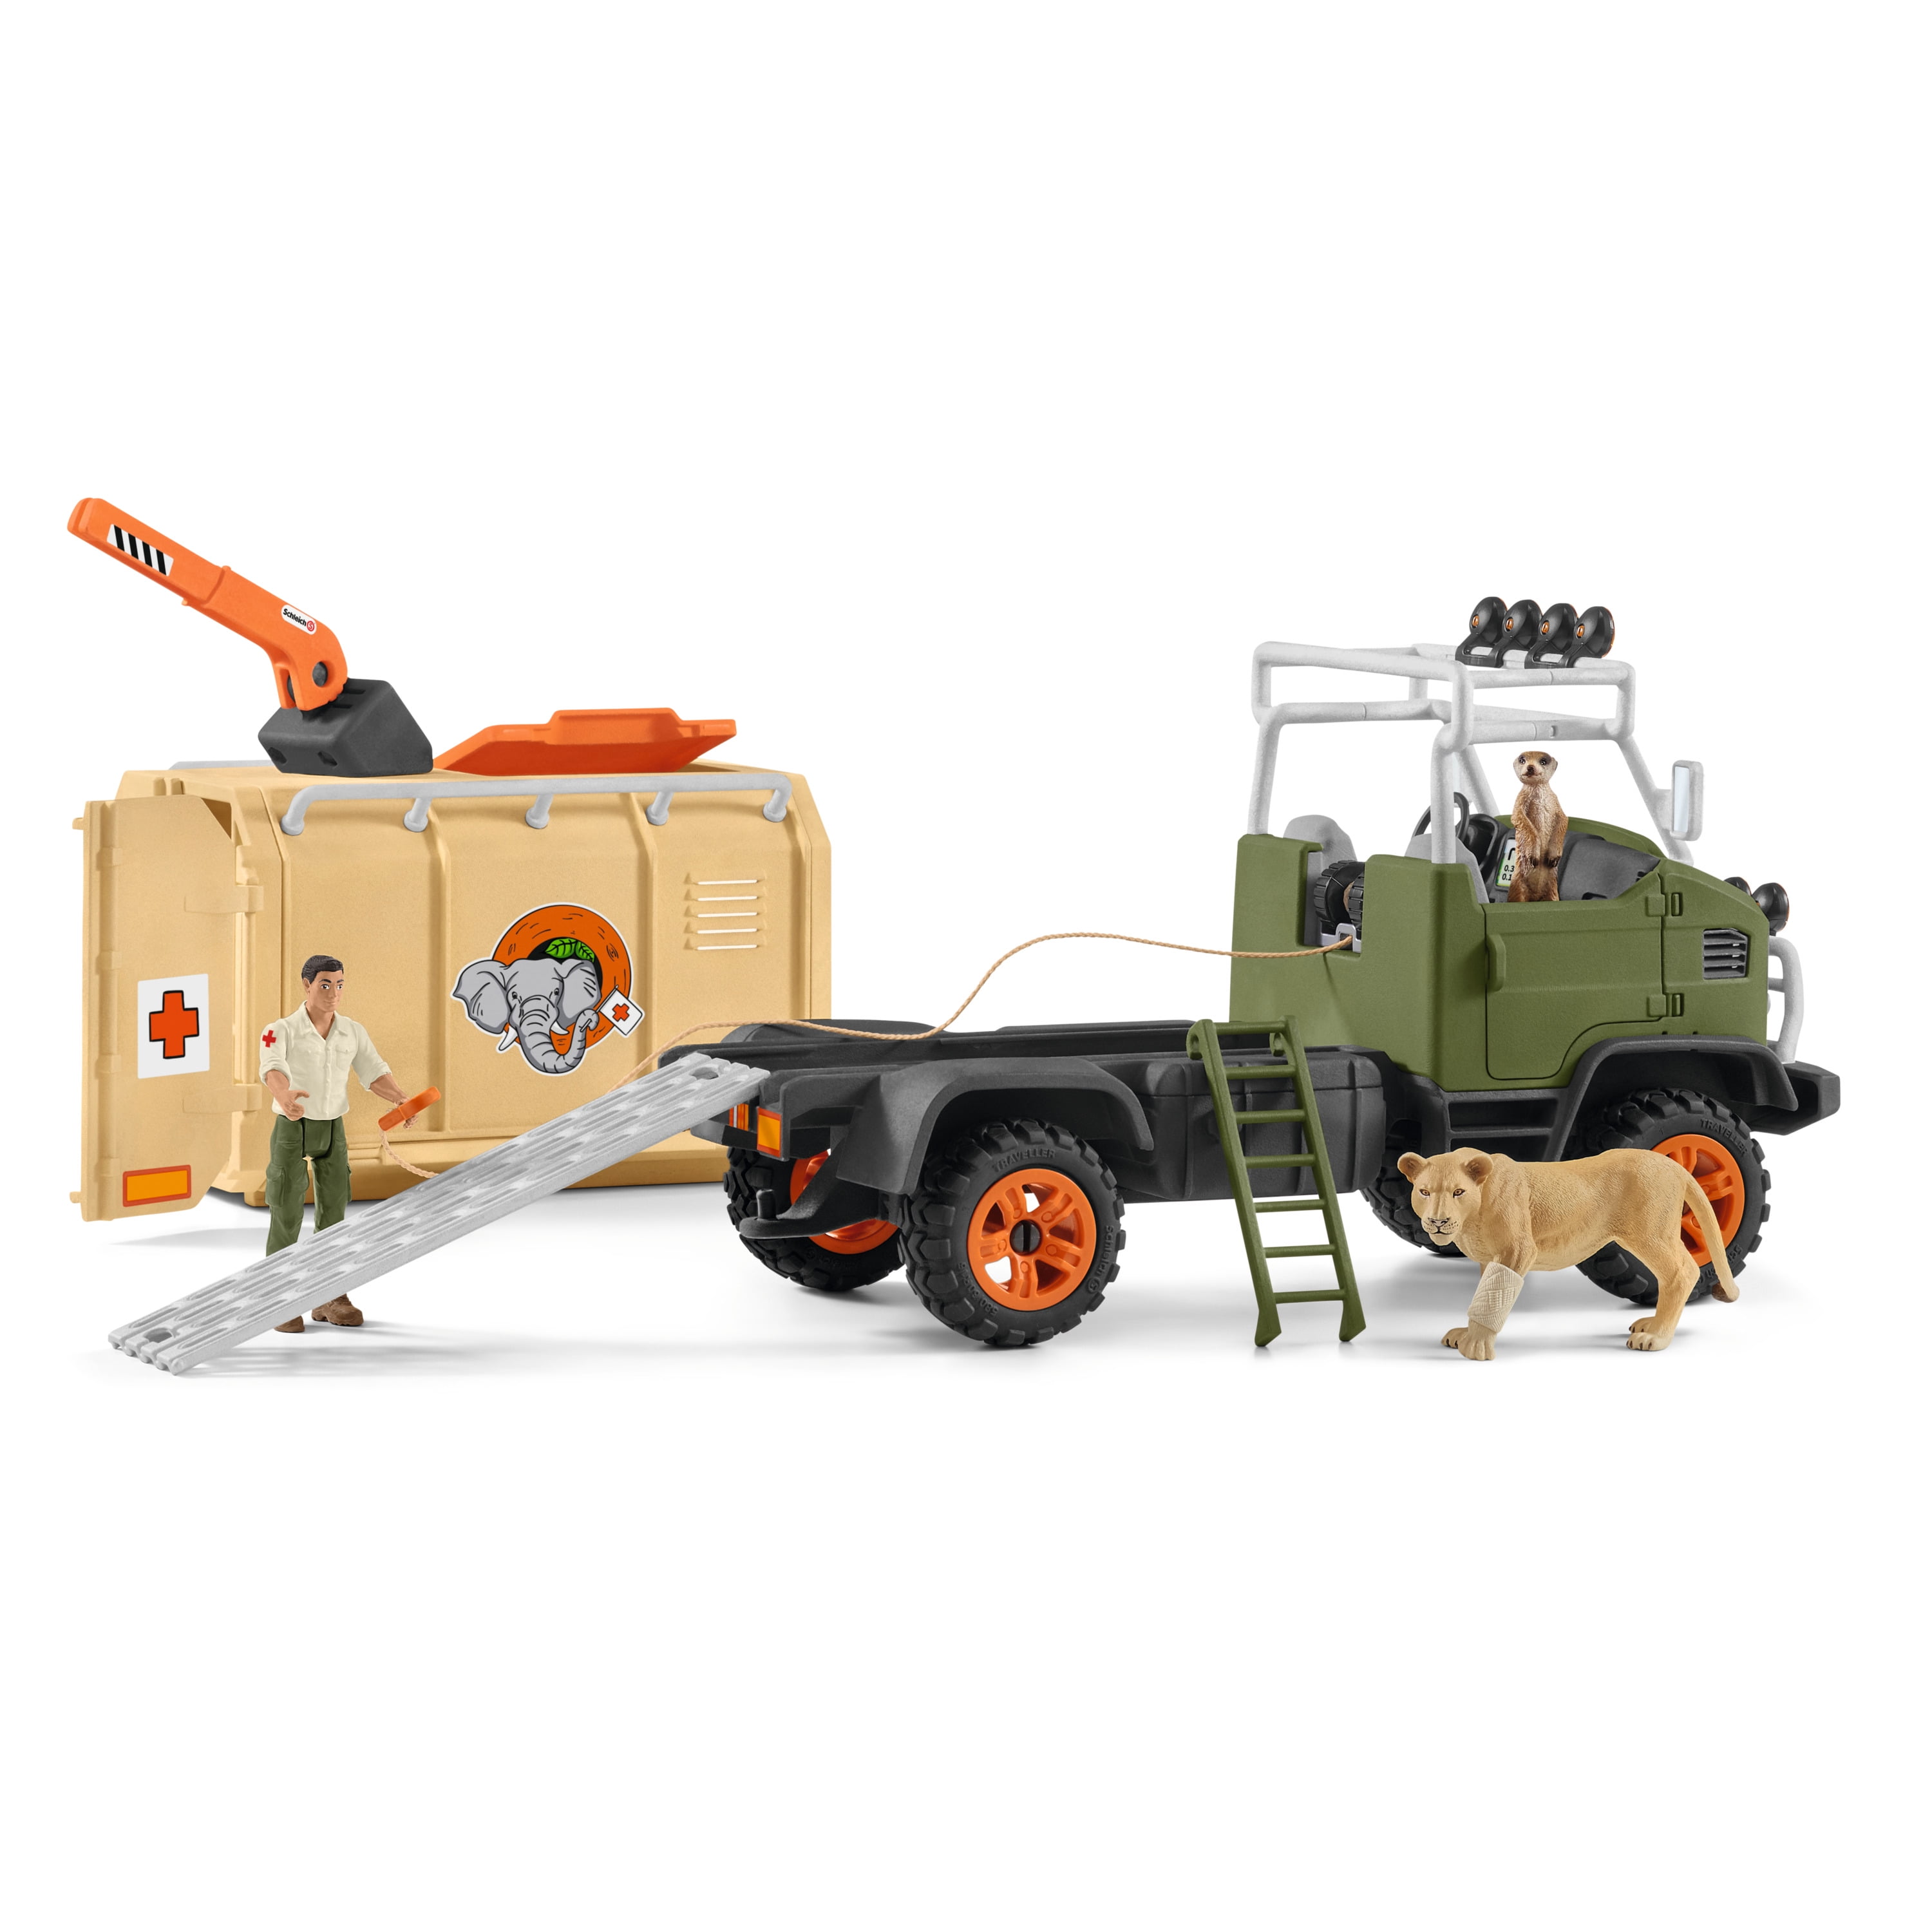 SCHLEICH Wild Life Animal Rescue Large Truck with Toy Figures & Accessories 